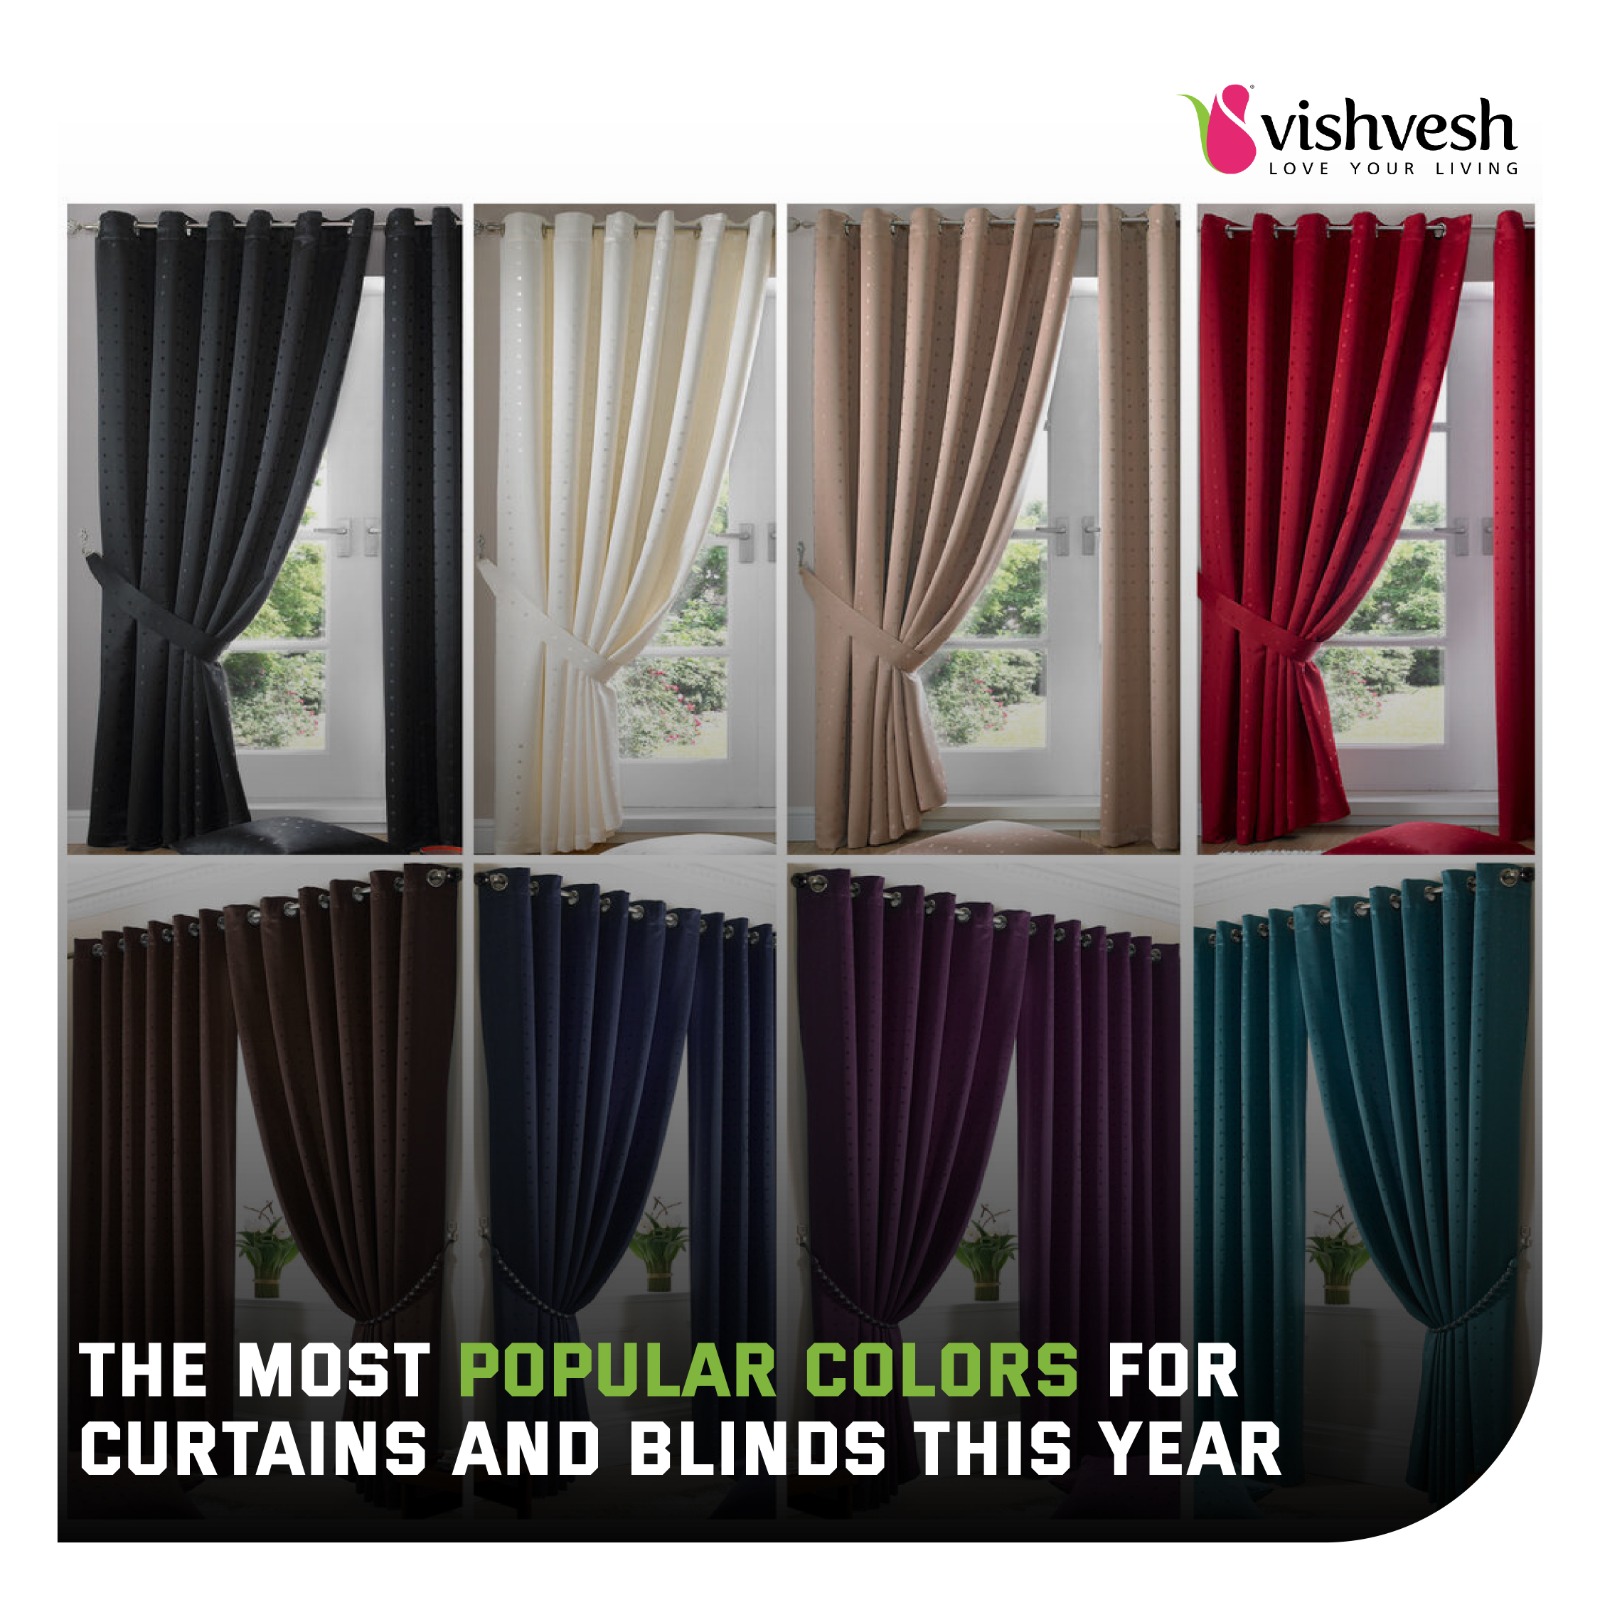 The Most Popular Colors for Curtains and Blinds This Year